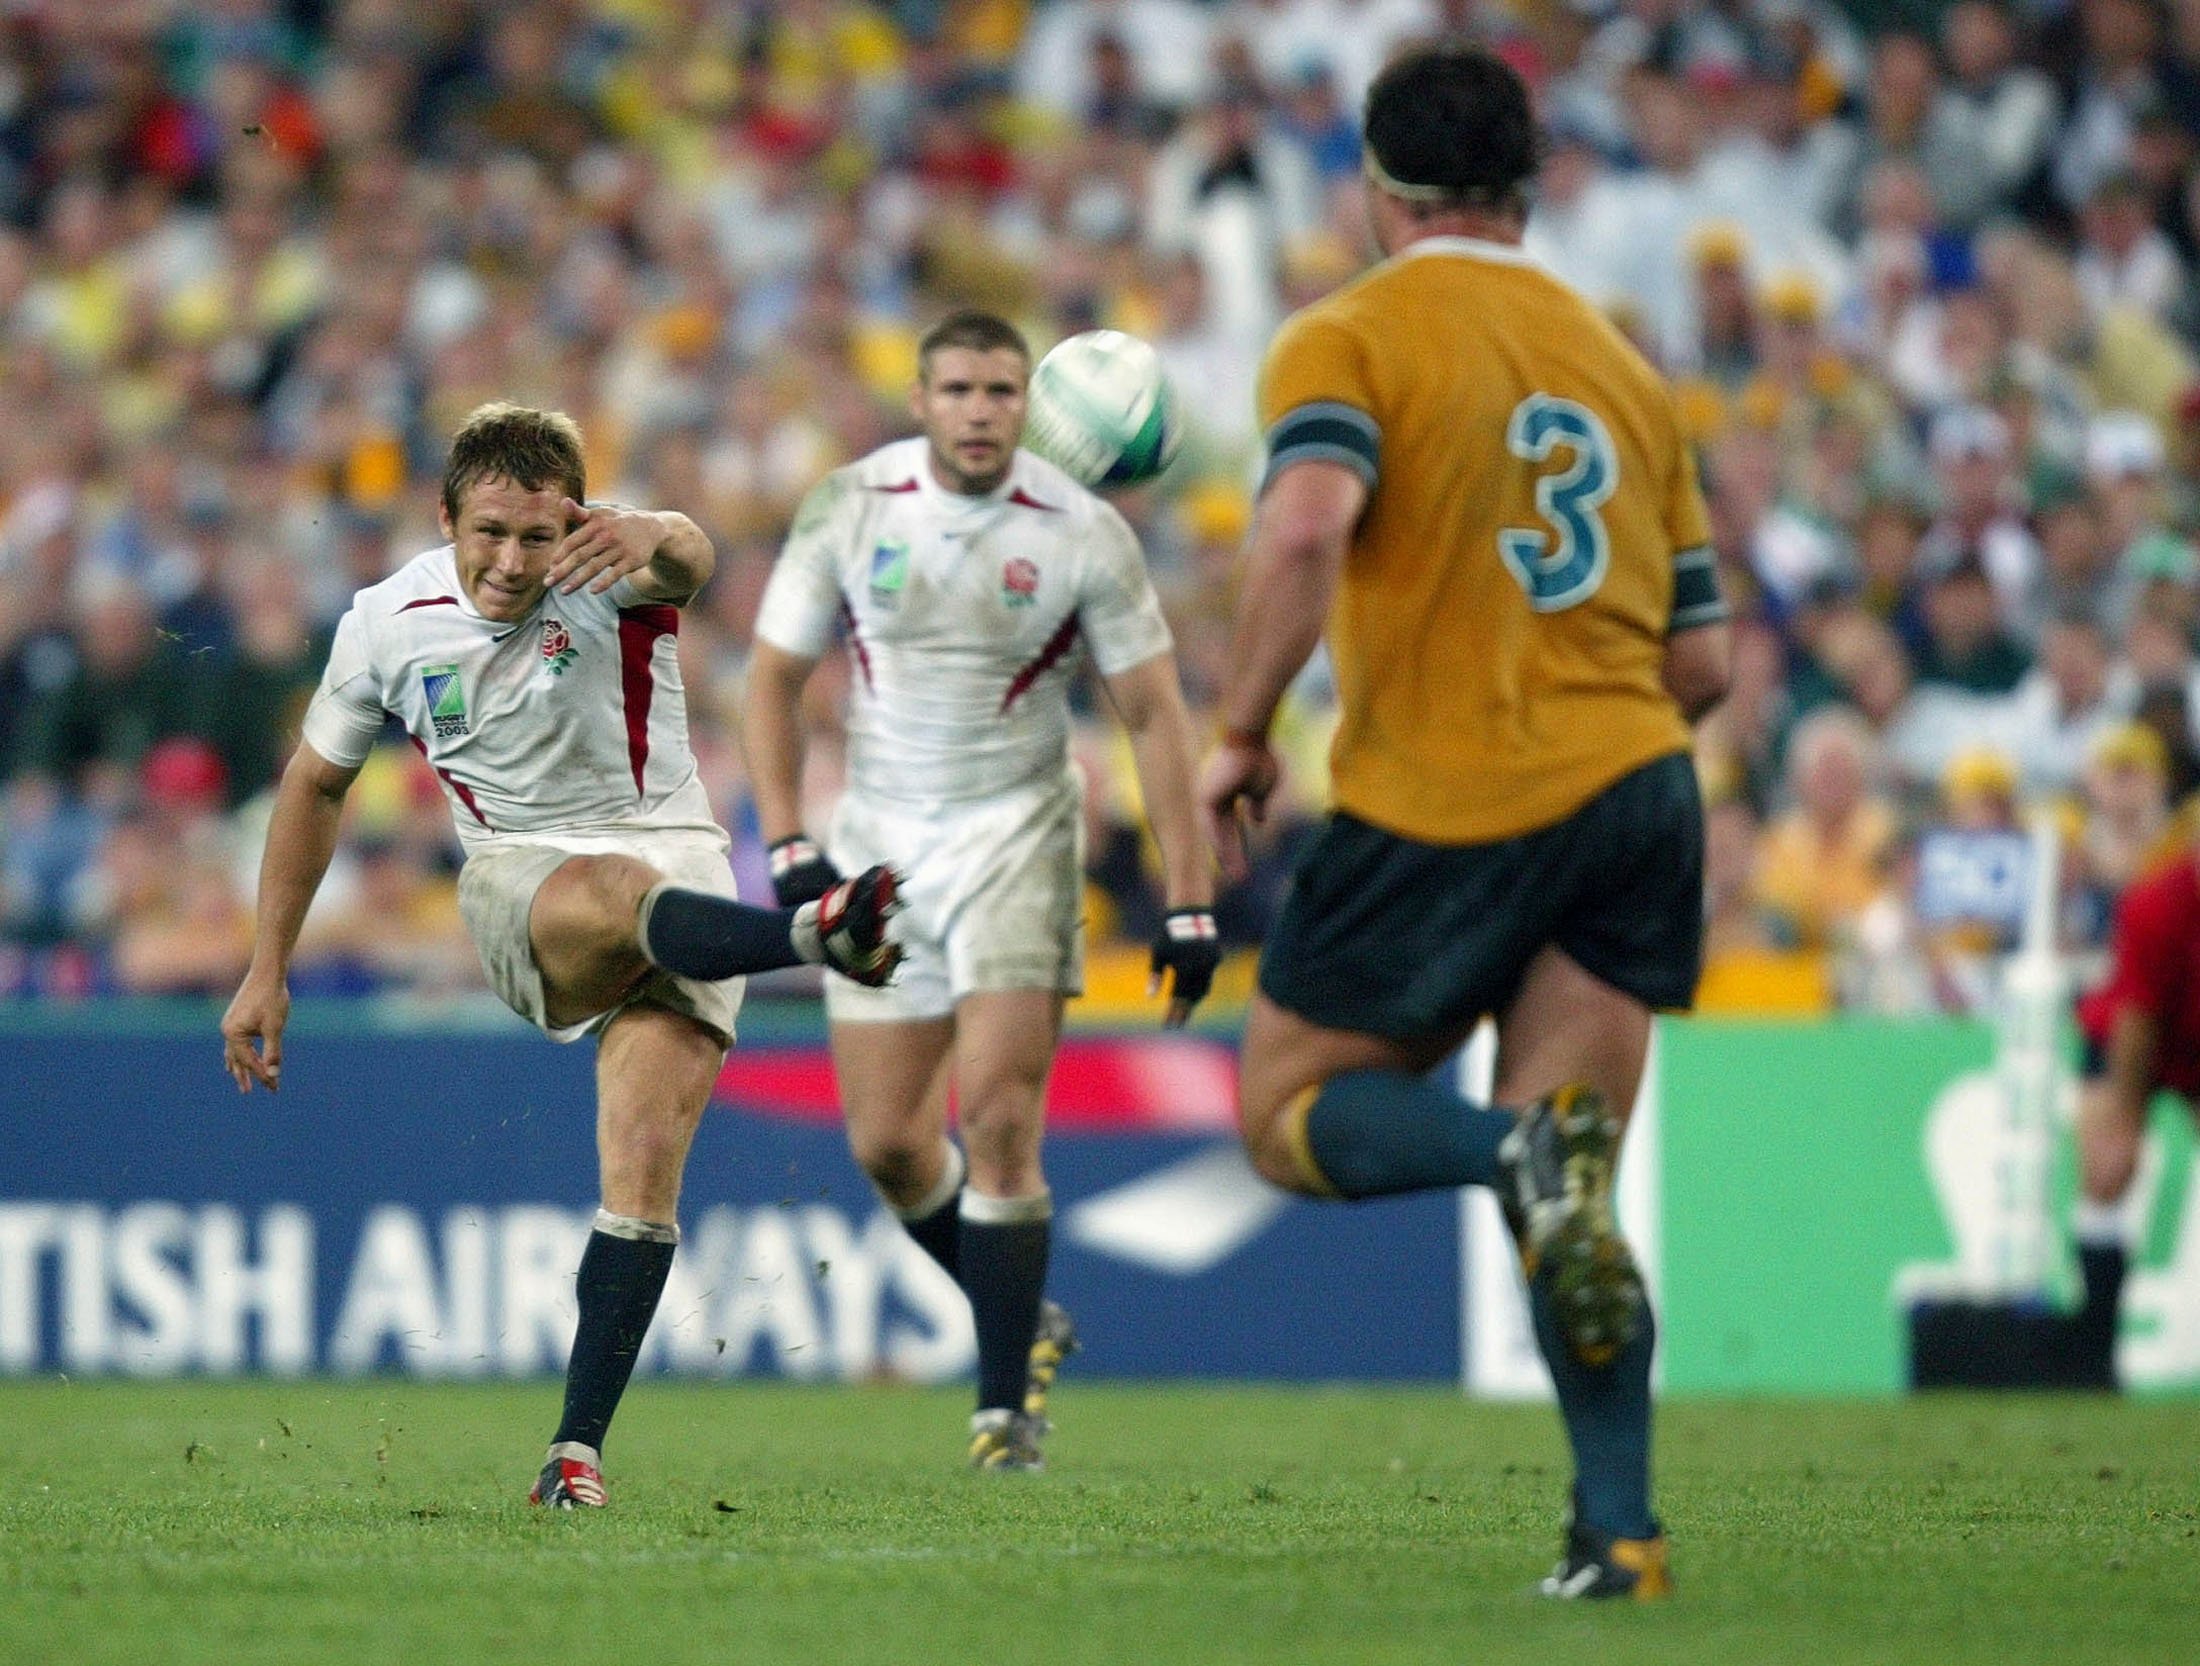 England’s Jonny Wilkinson kicks the winning drop goal against Australia in the Rugby World Cup final in Sydney in 2003. England won 20-17 after 20 minutes of extra time. Photo: AP